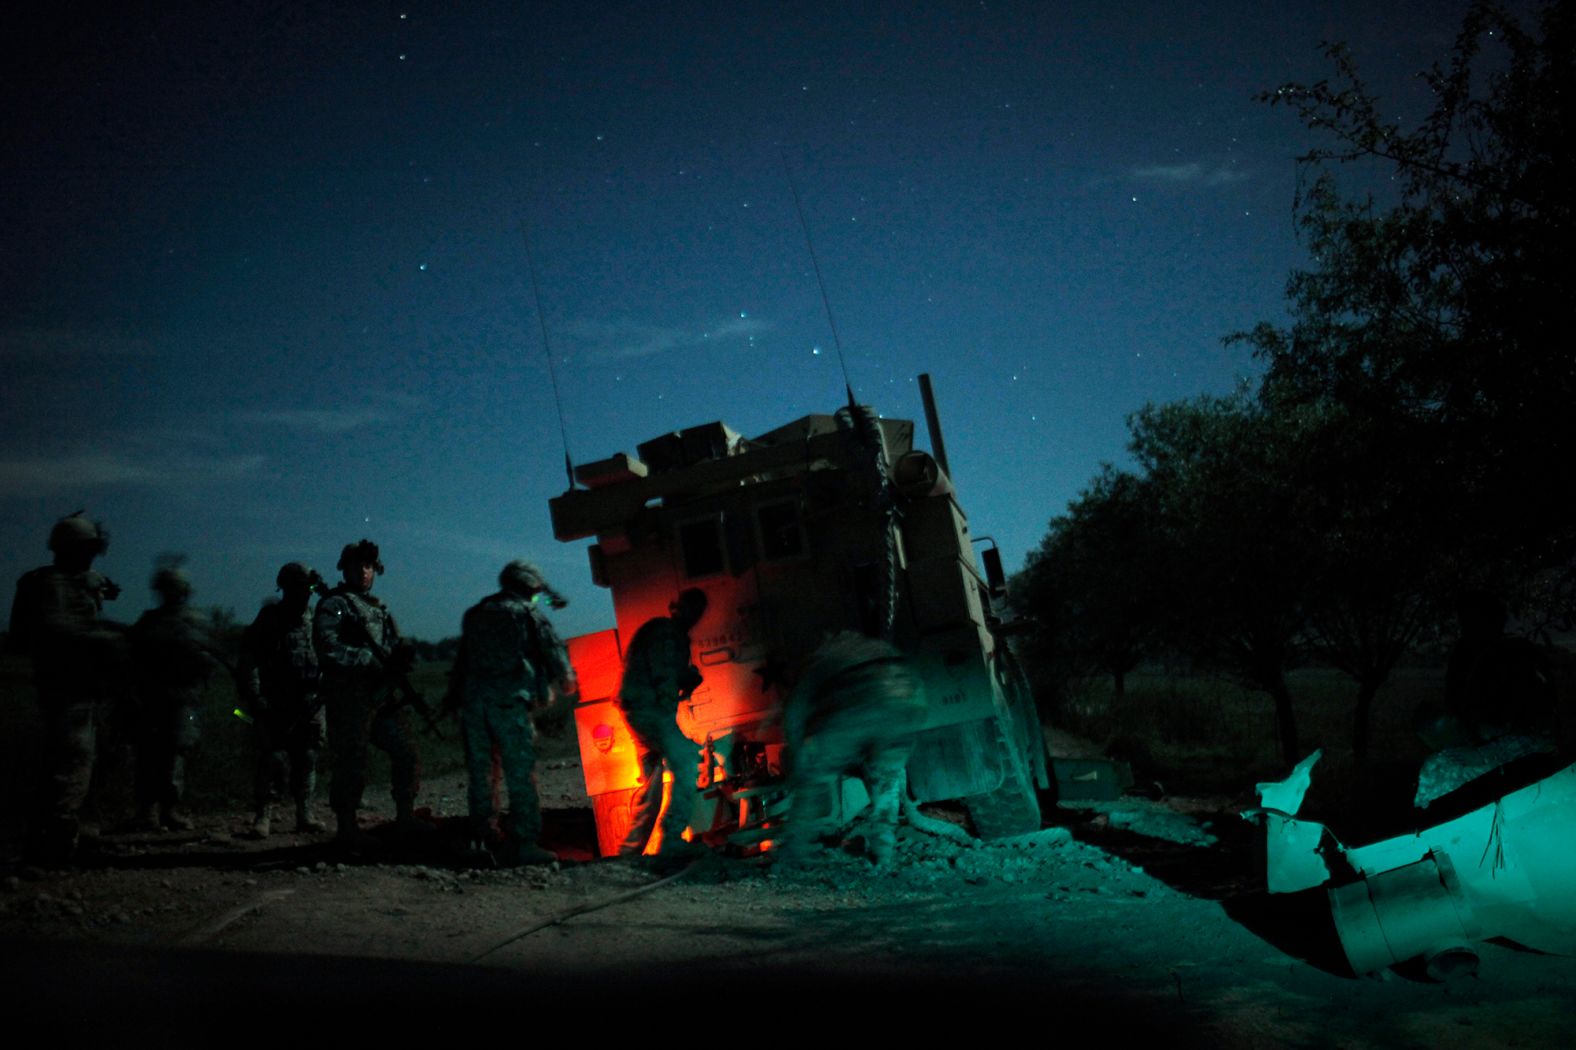 US soldiers recover an armored vehicle that was hit by an explosive device in Afghanistan's Kunduz province in April 2010.